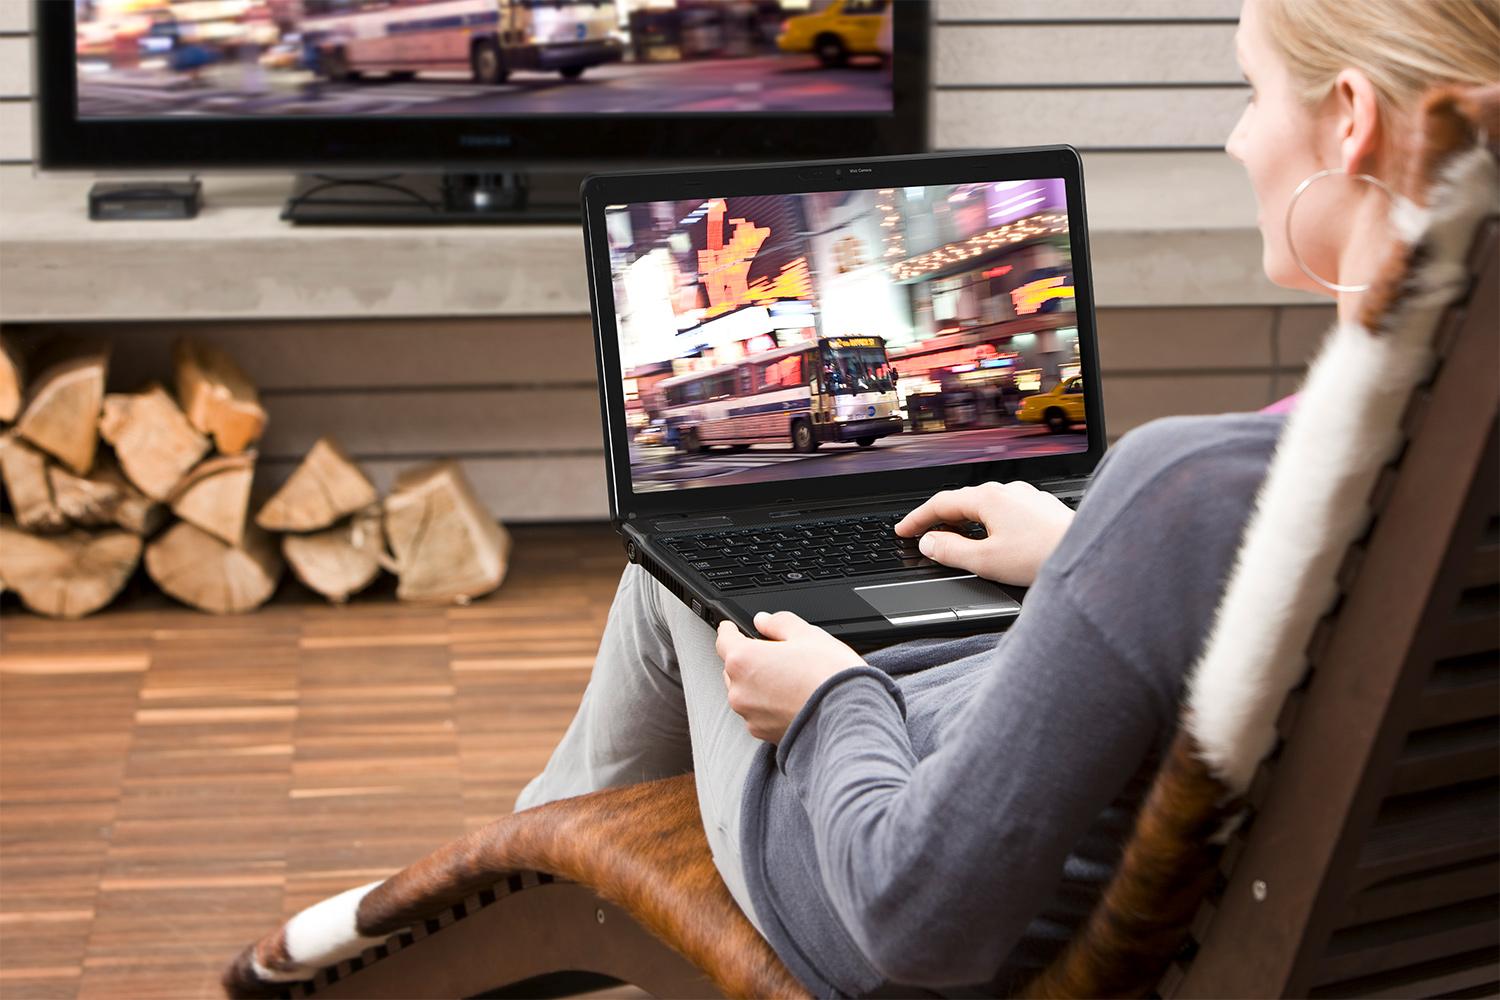 How to easily connect any laptop to a TV | Digital Trends